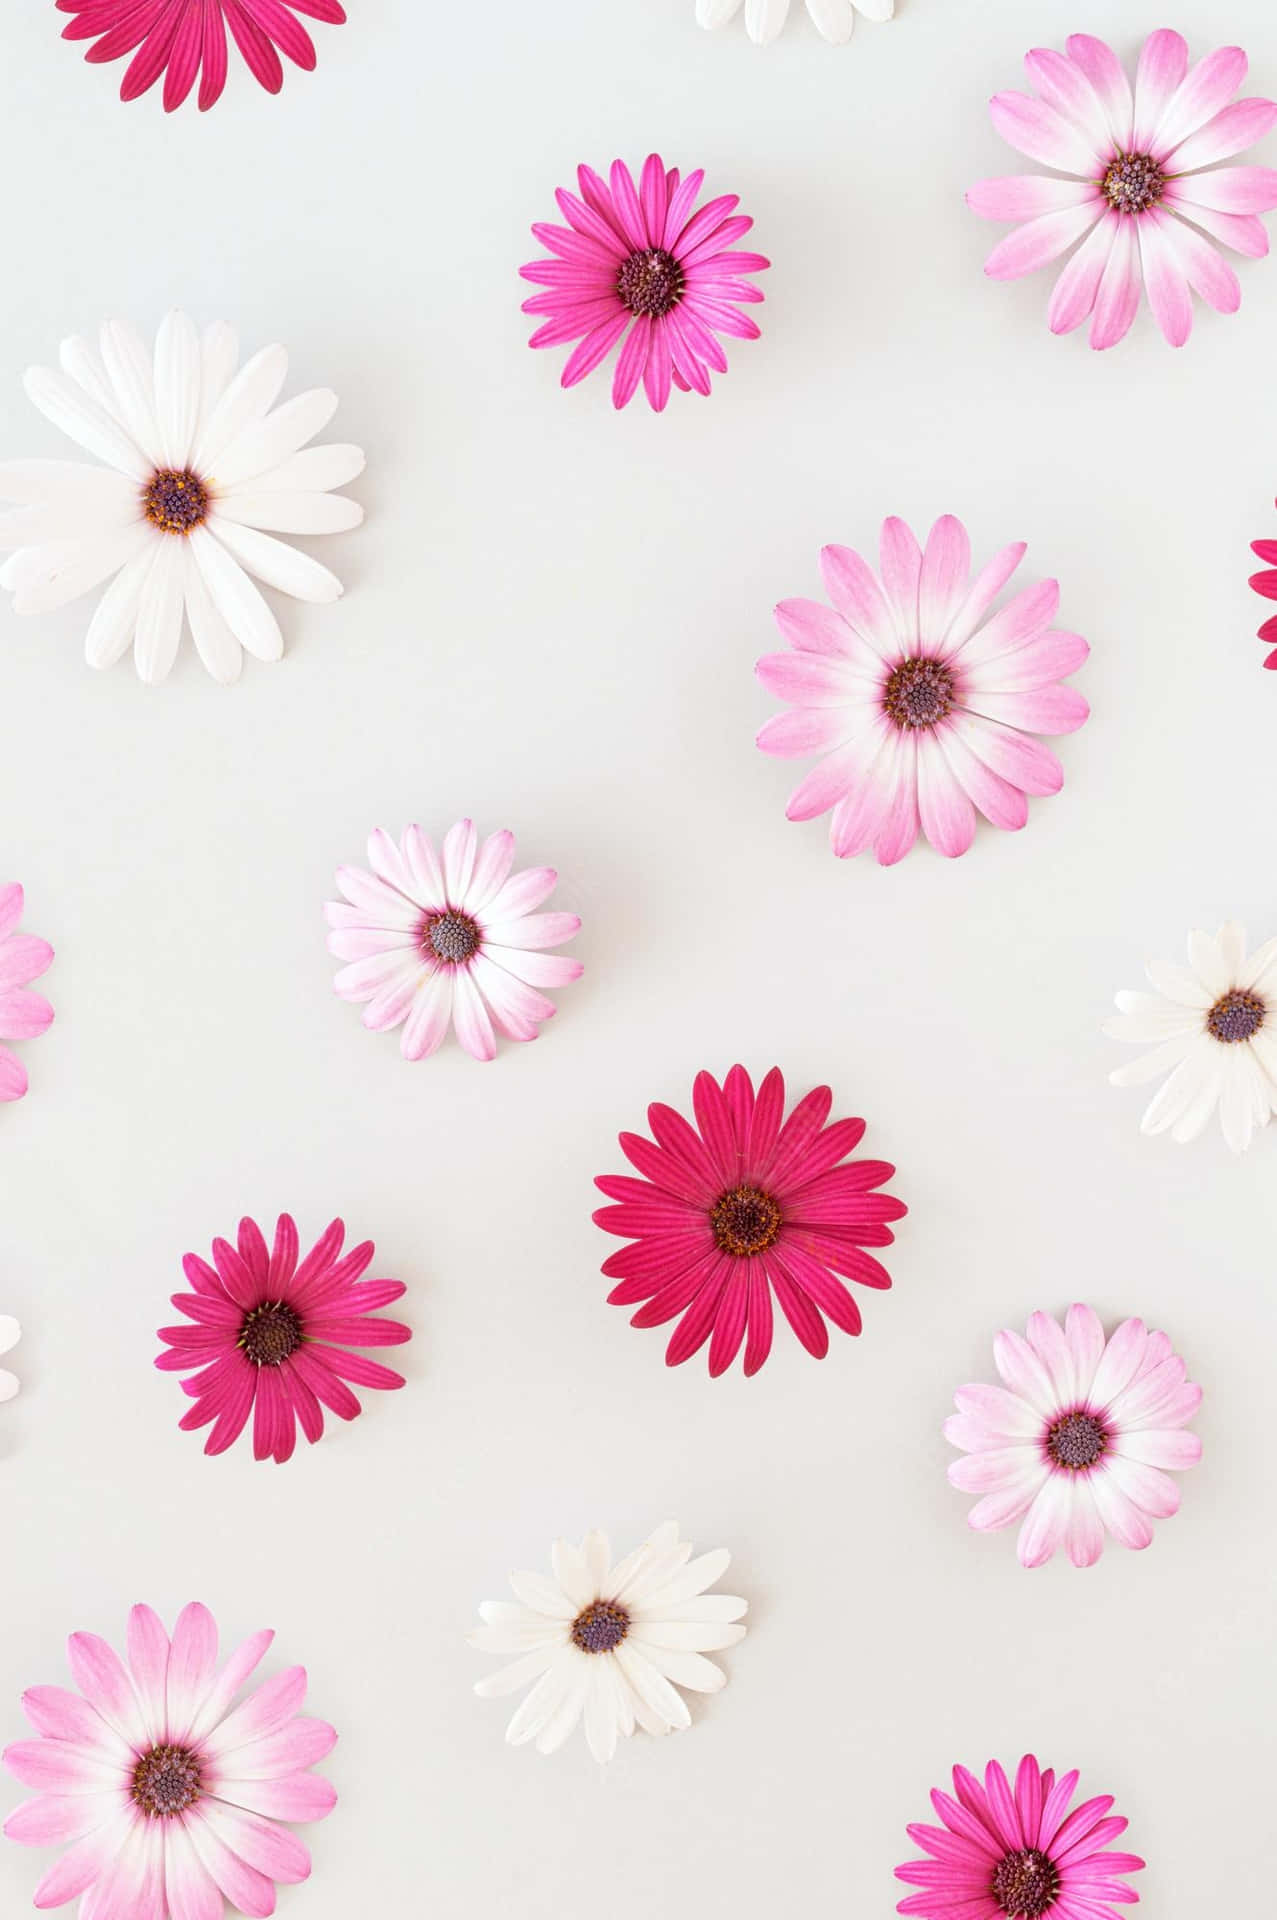 Exquisite Floral Phone Background